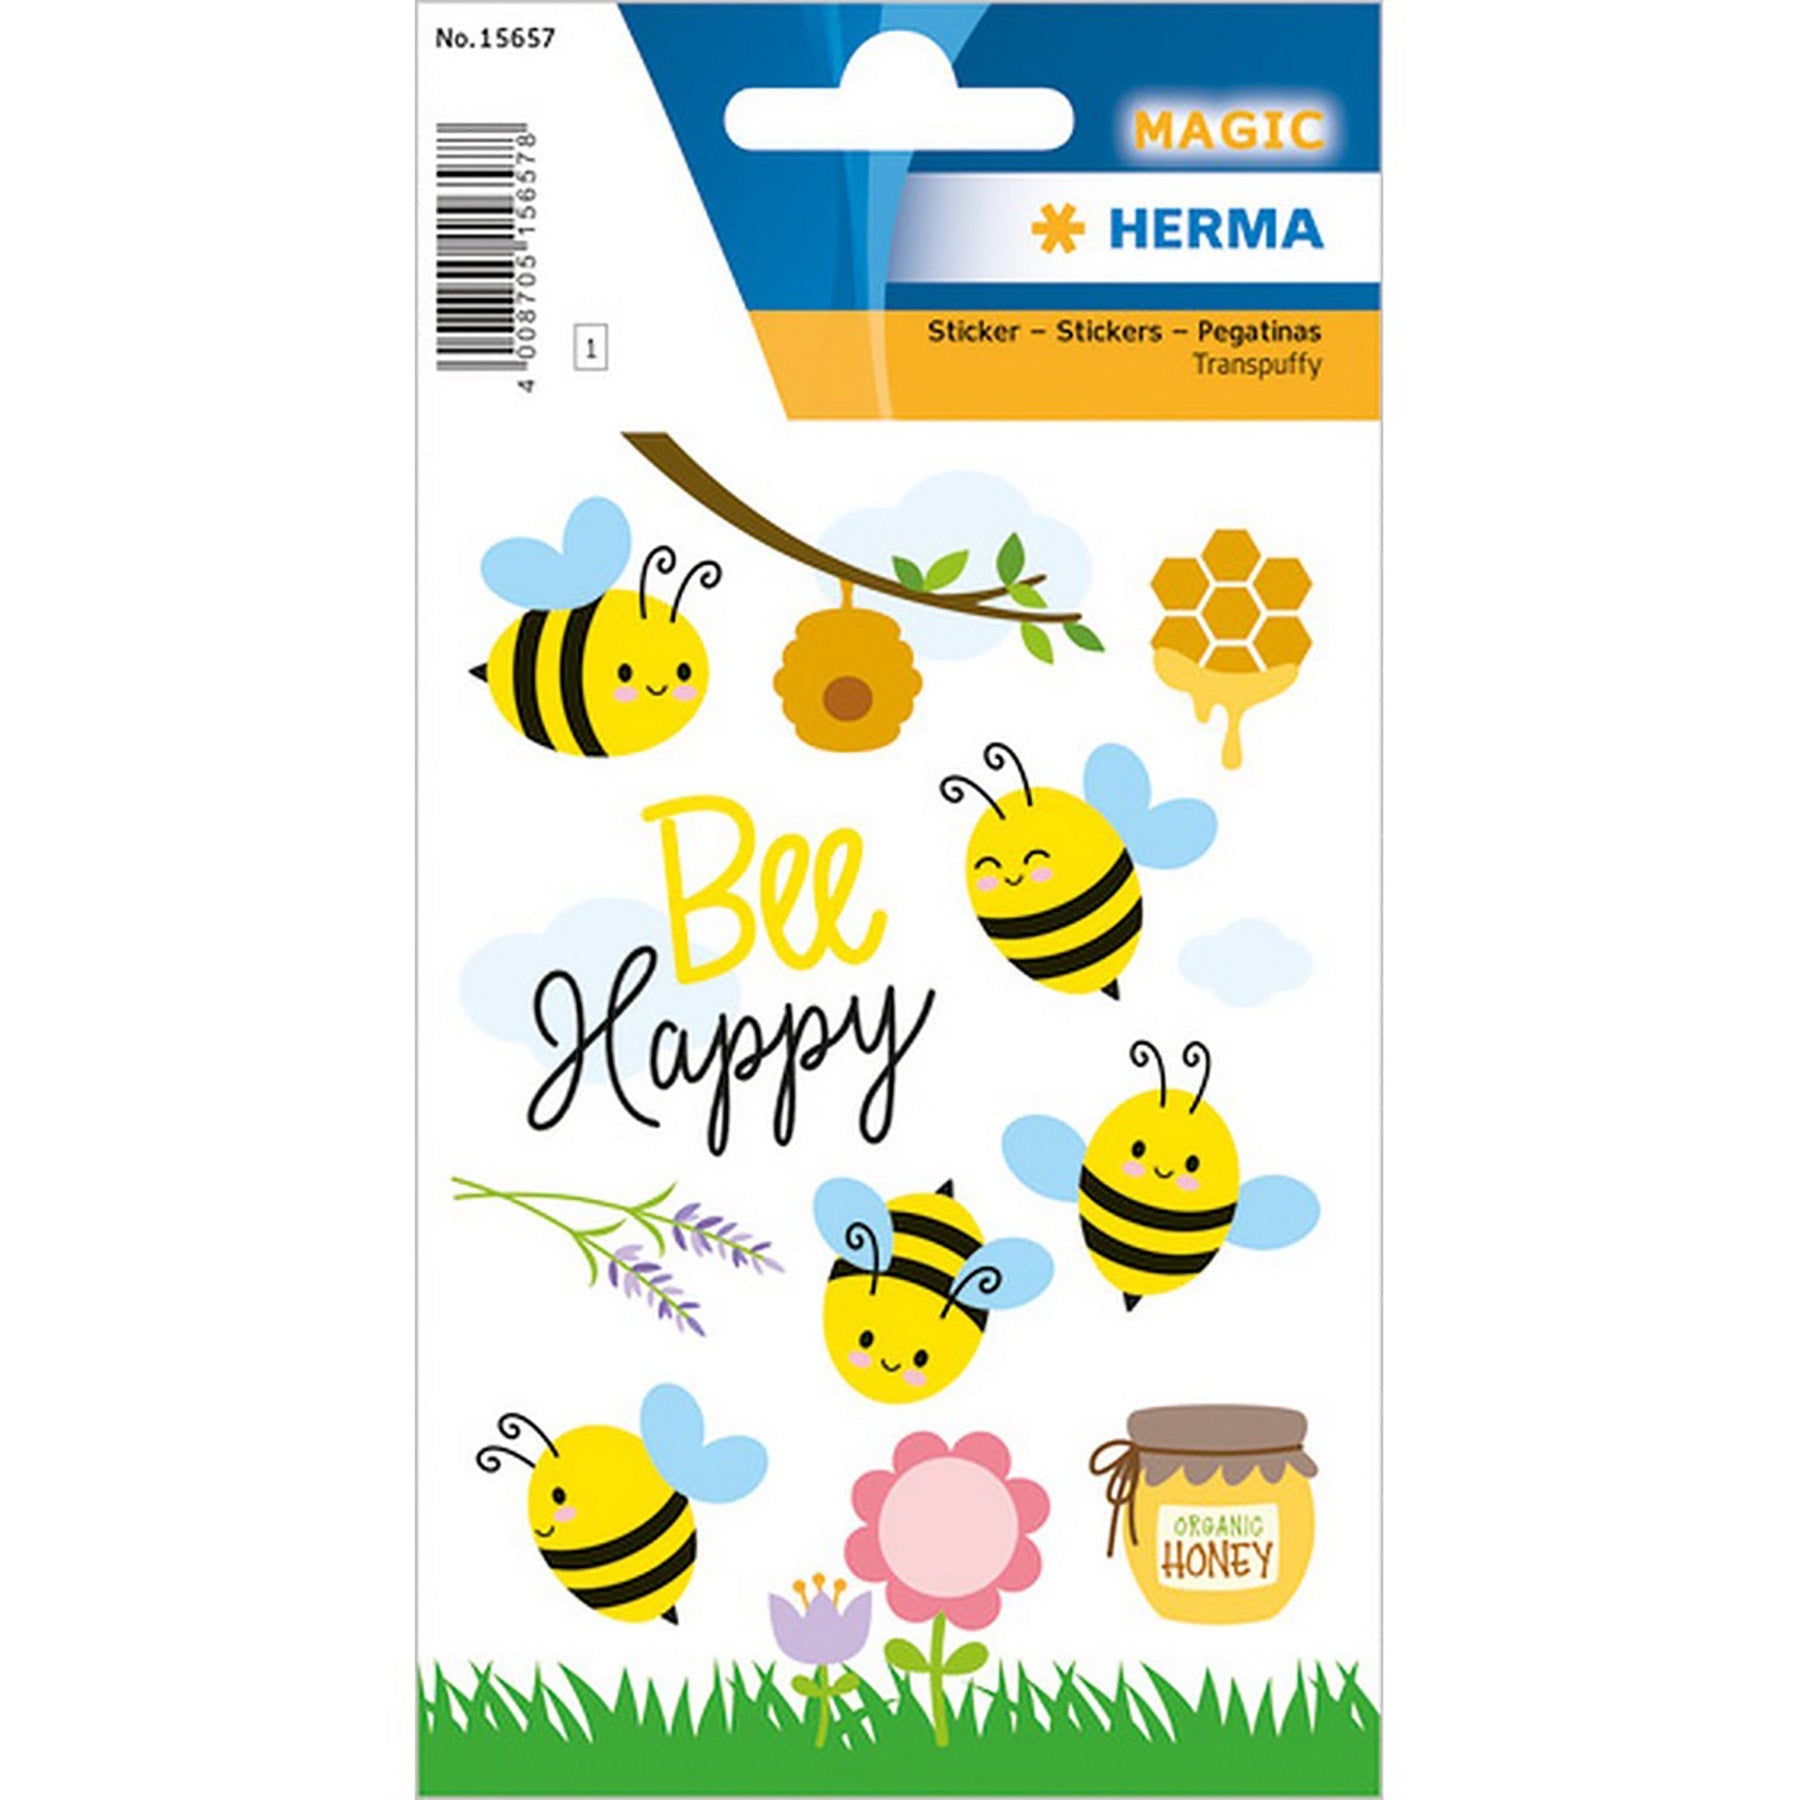 Herma Magic Stickers Cute Bees Transpuffy 4.75x3.1in Sheet